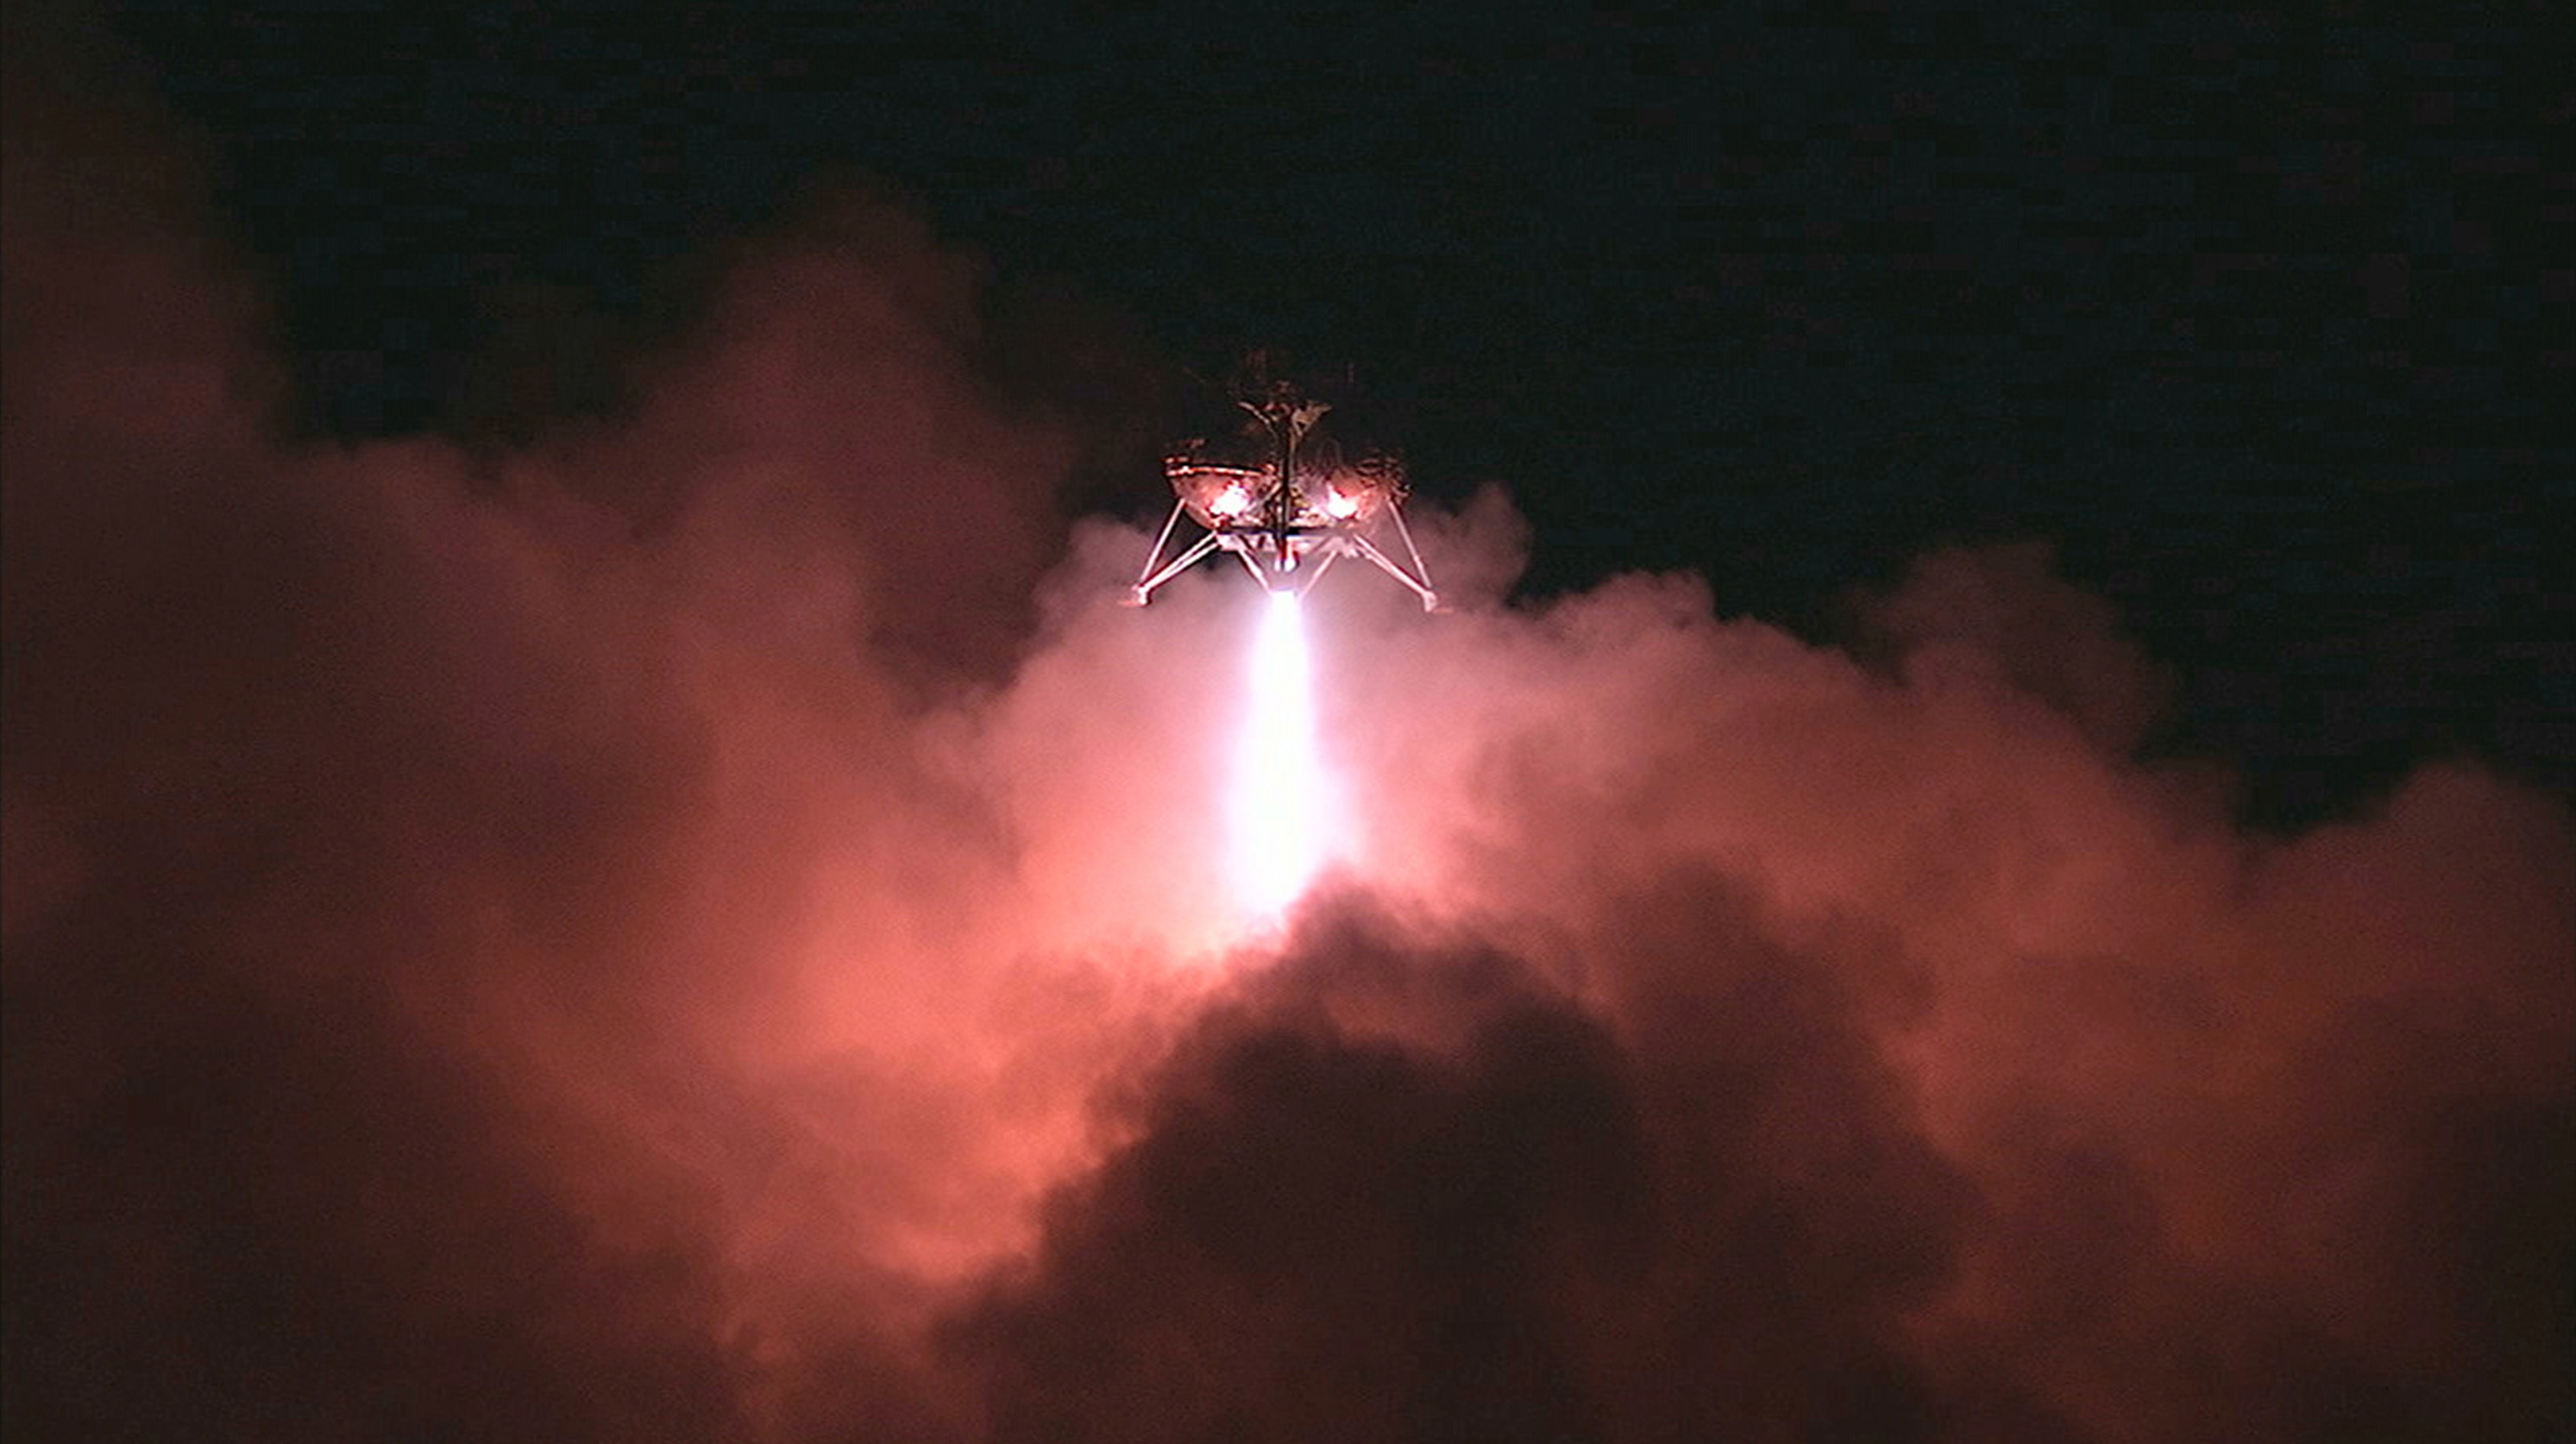 NASA’s Morpheus prototype lander proved it was quite capable of successfully navigating the ALHAT hazard field after finding a safe landing spot during a night-time, free-flight test conducted at Kennedy Space Center on May 28, 2014. Photo credit: NASA/Mike Chambers